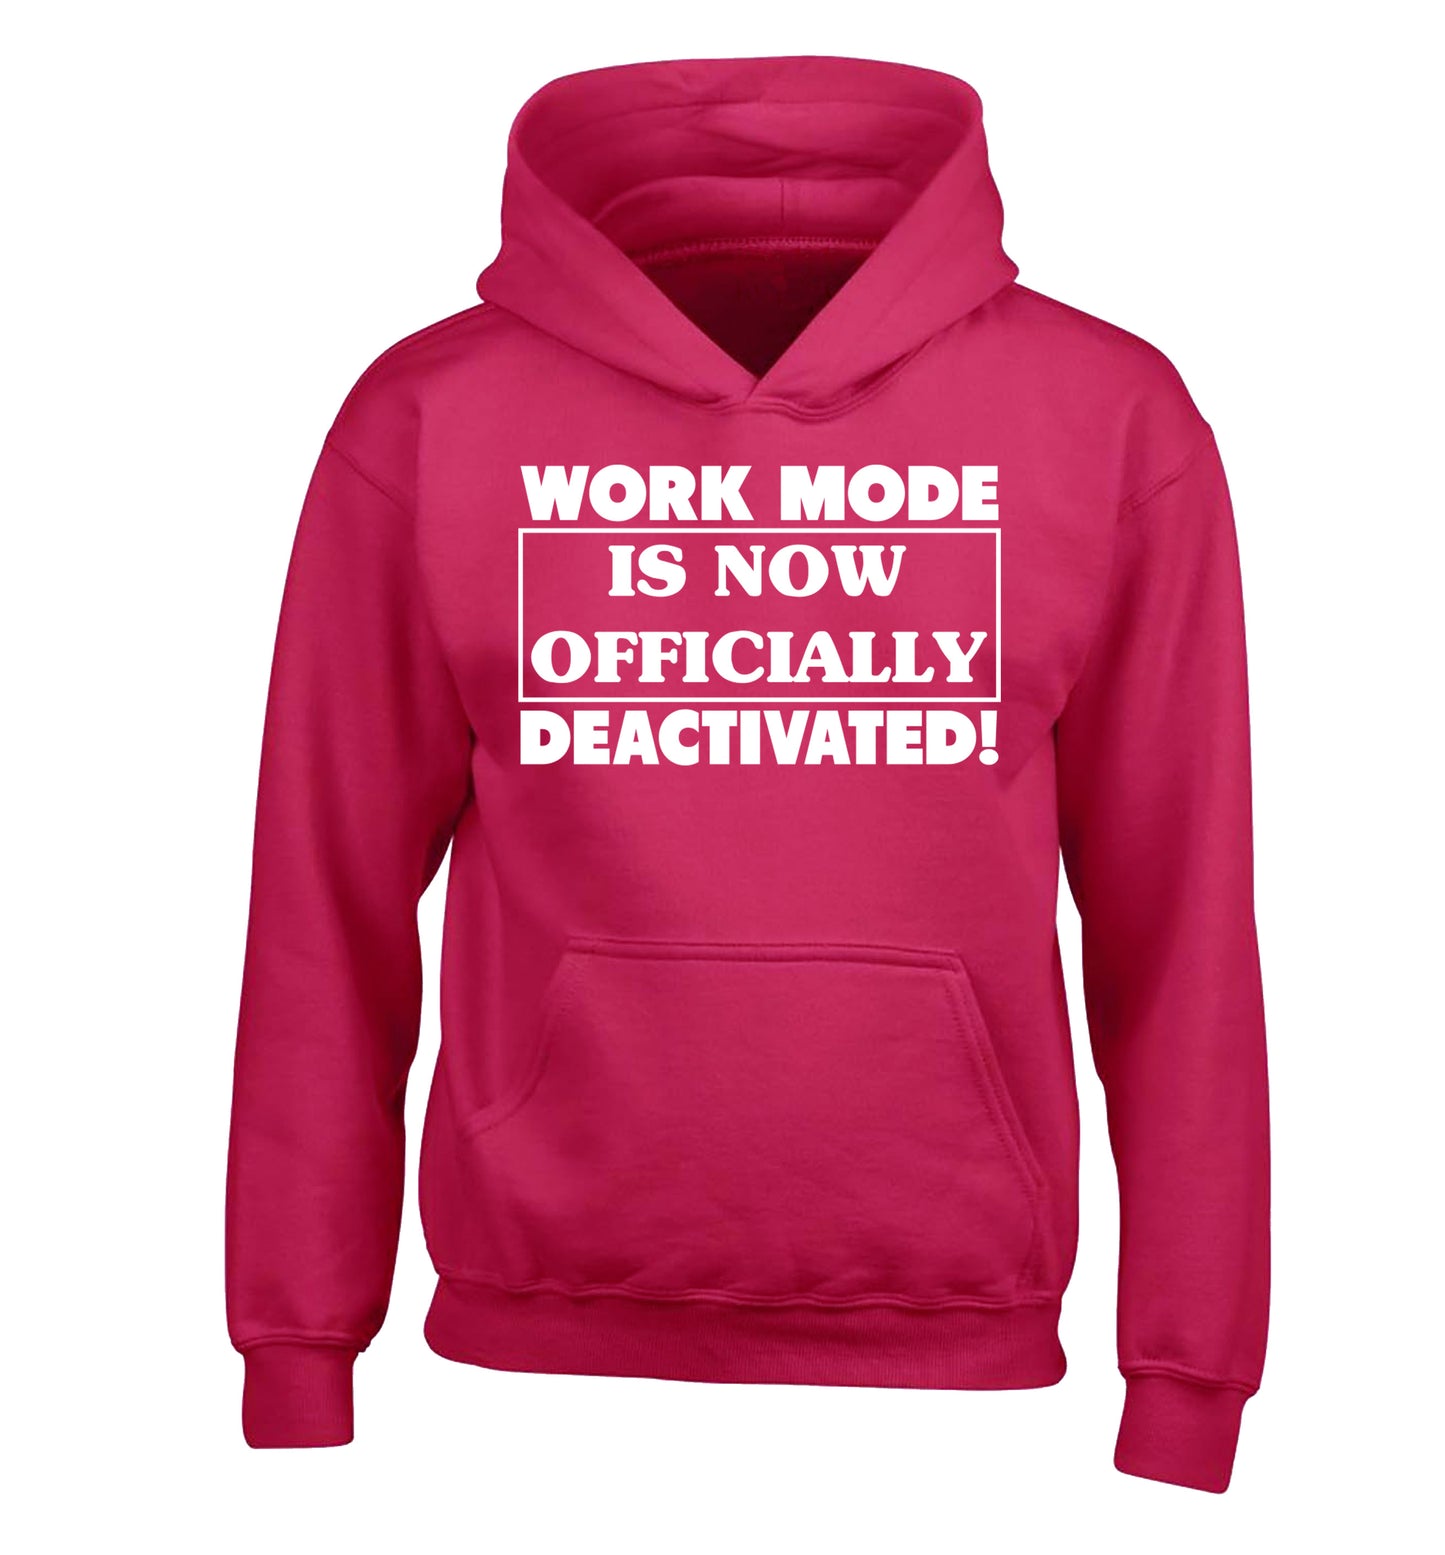 Work mode is now officially deactivated children's pink hoodie 12-13 Years